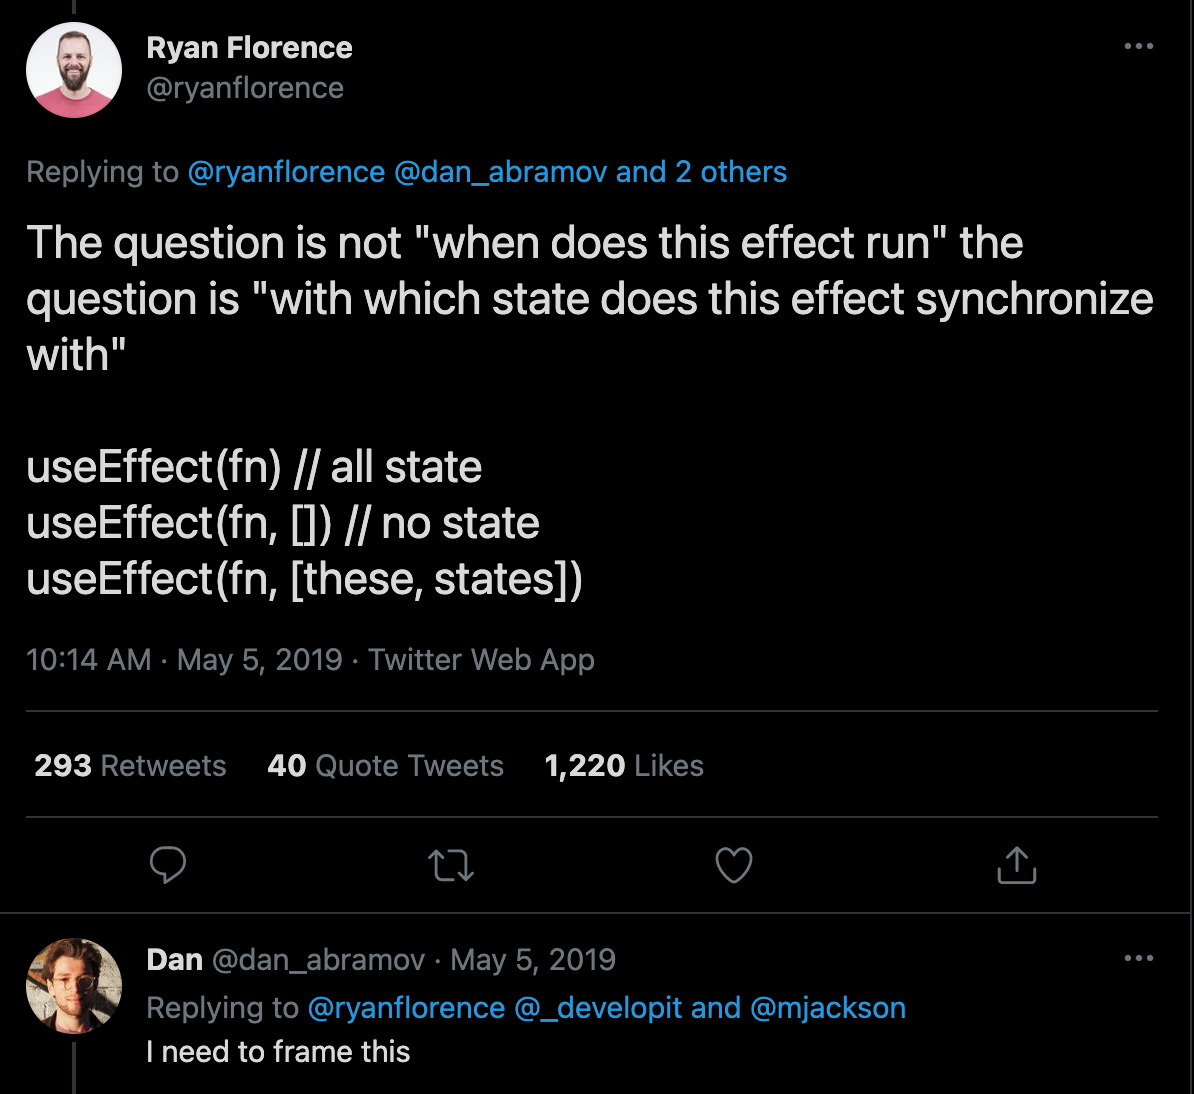 the question is not "when does this effect run", the question is "with which state does this effect synchronize with" - Ryan Florence, 2019, Twitter